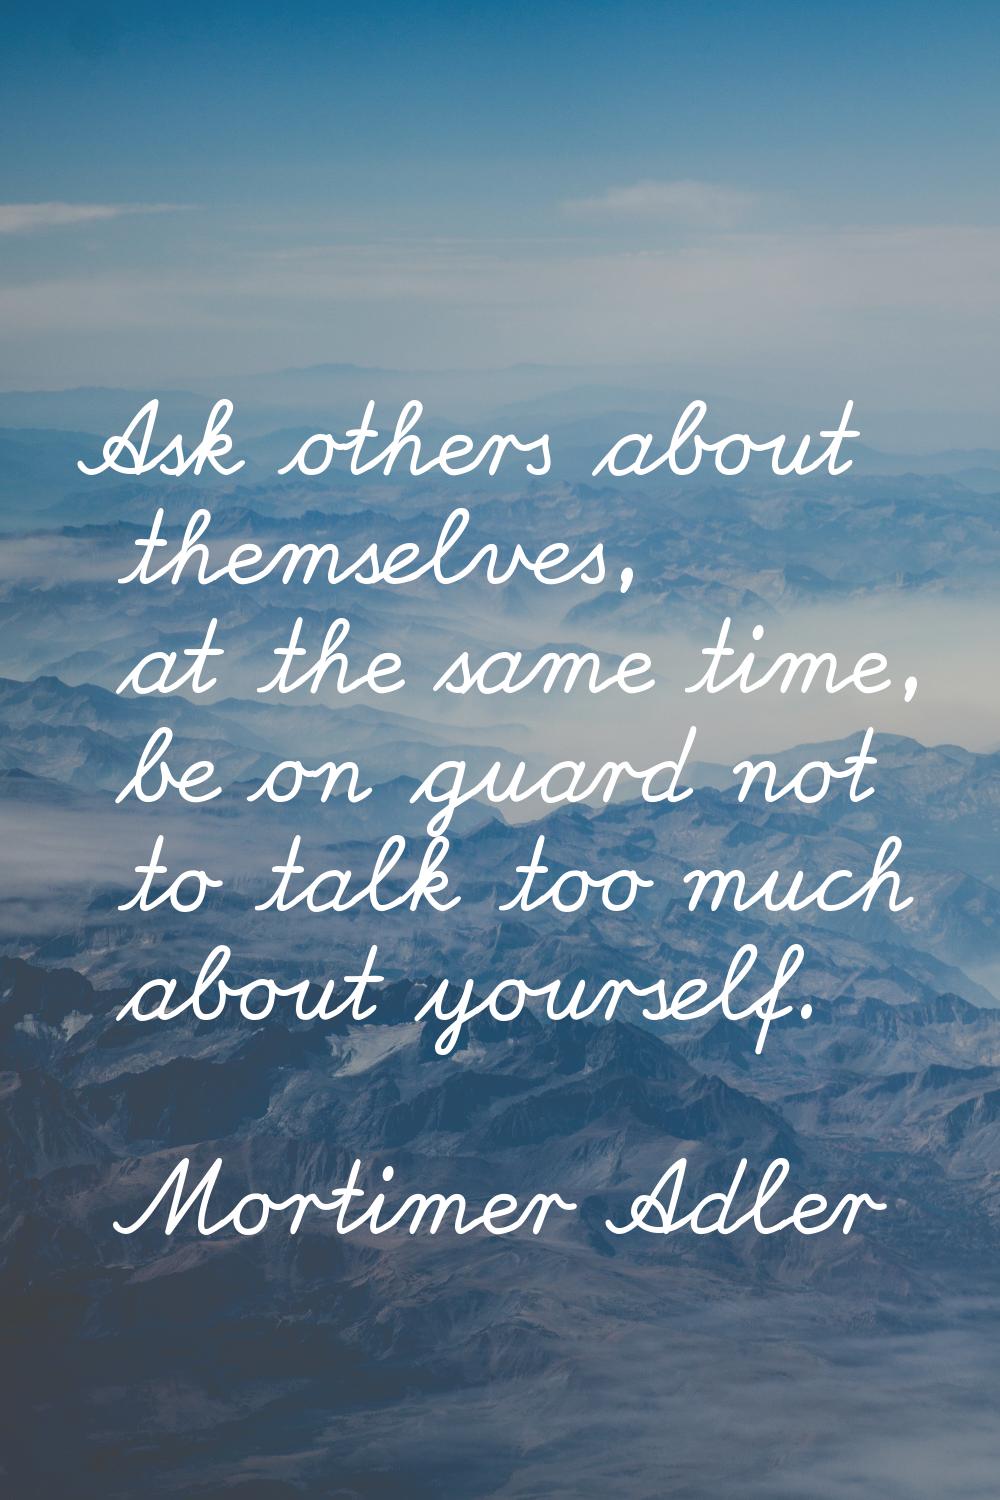 Ask others about themselves, at the same time, be on guard not to talk too much about yourself.